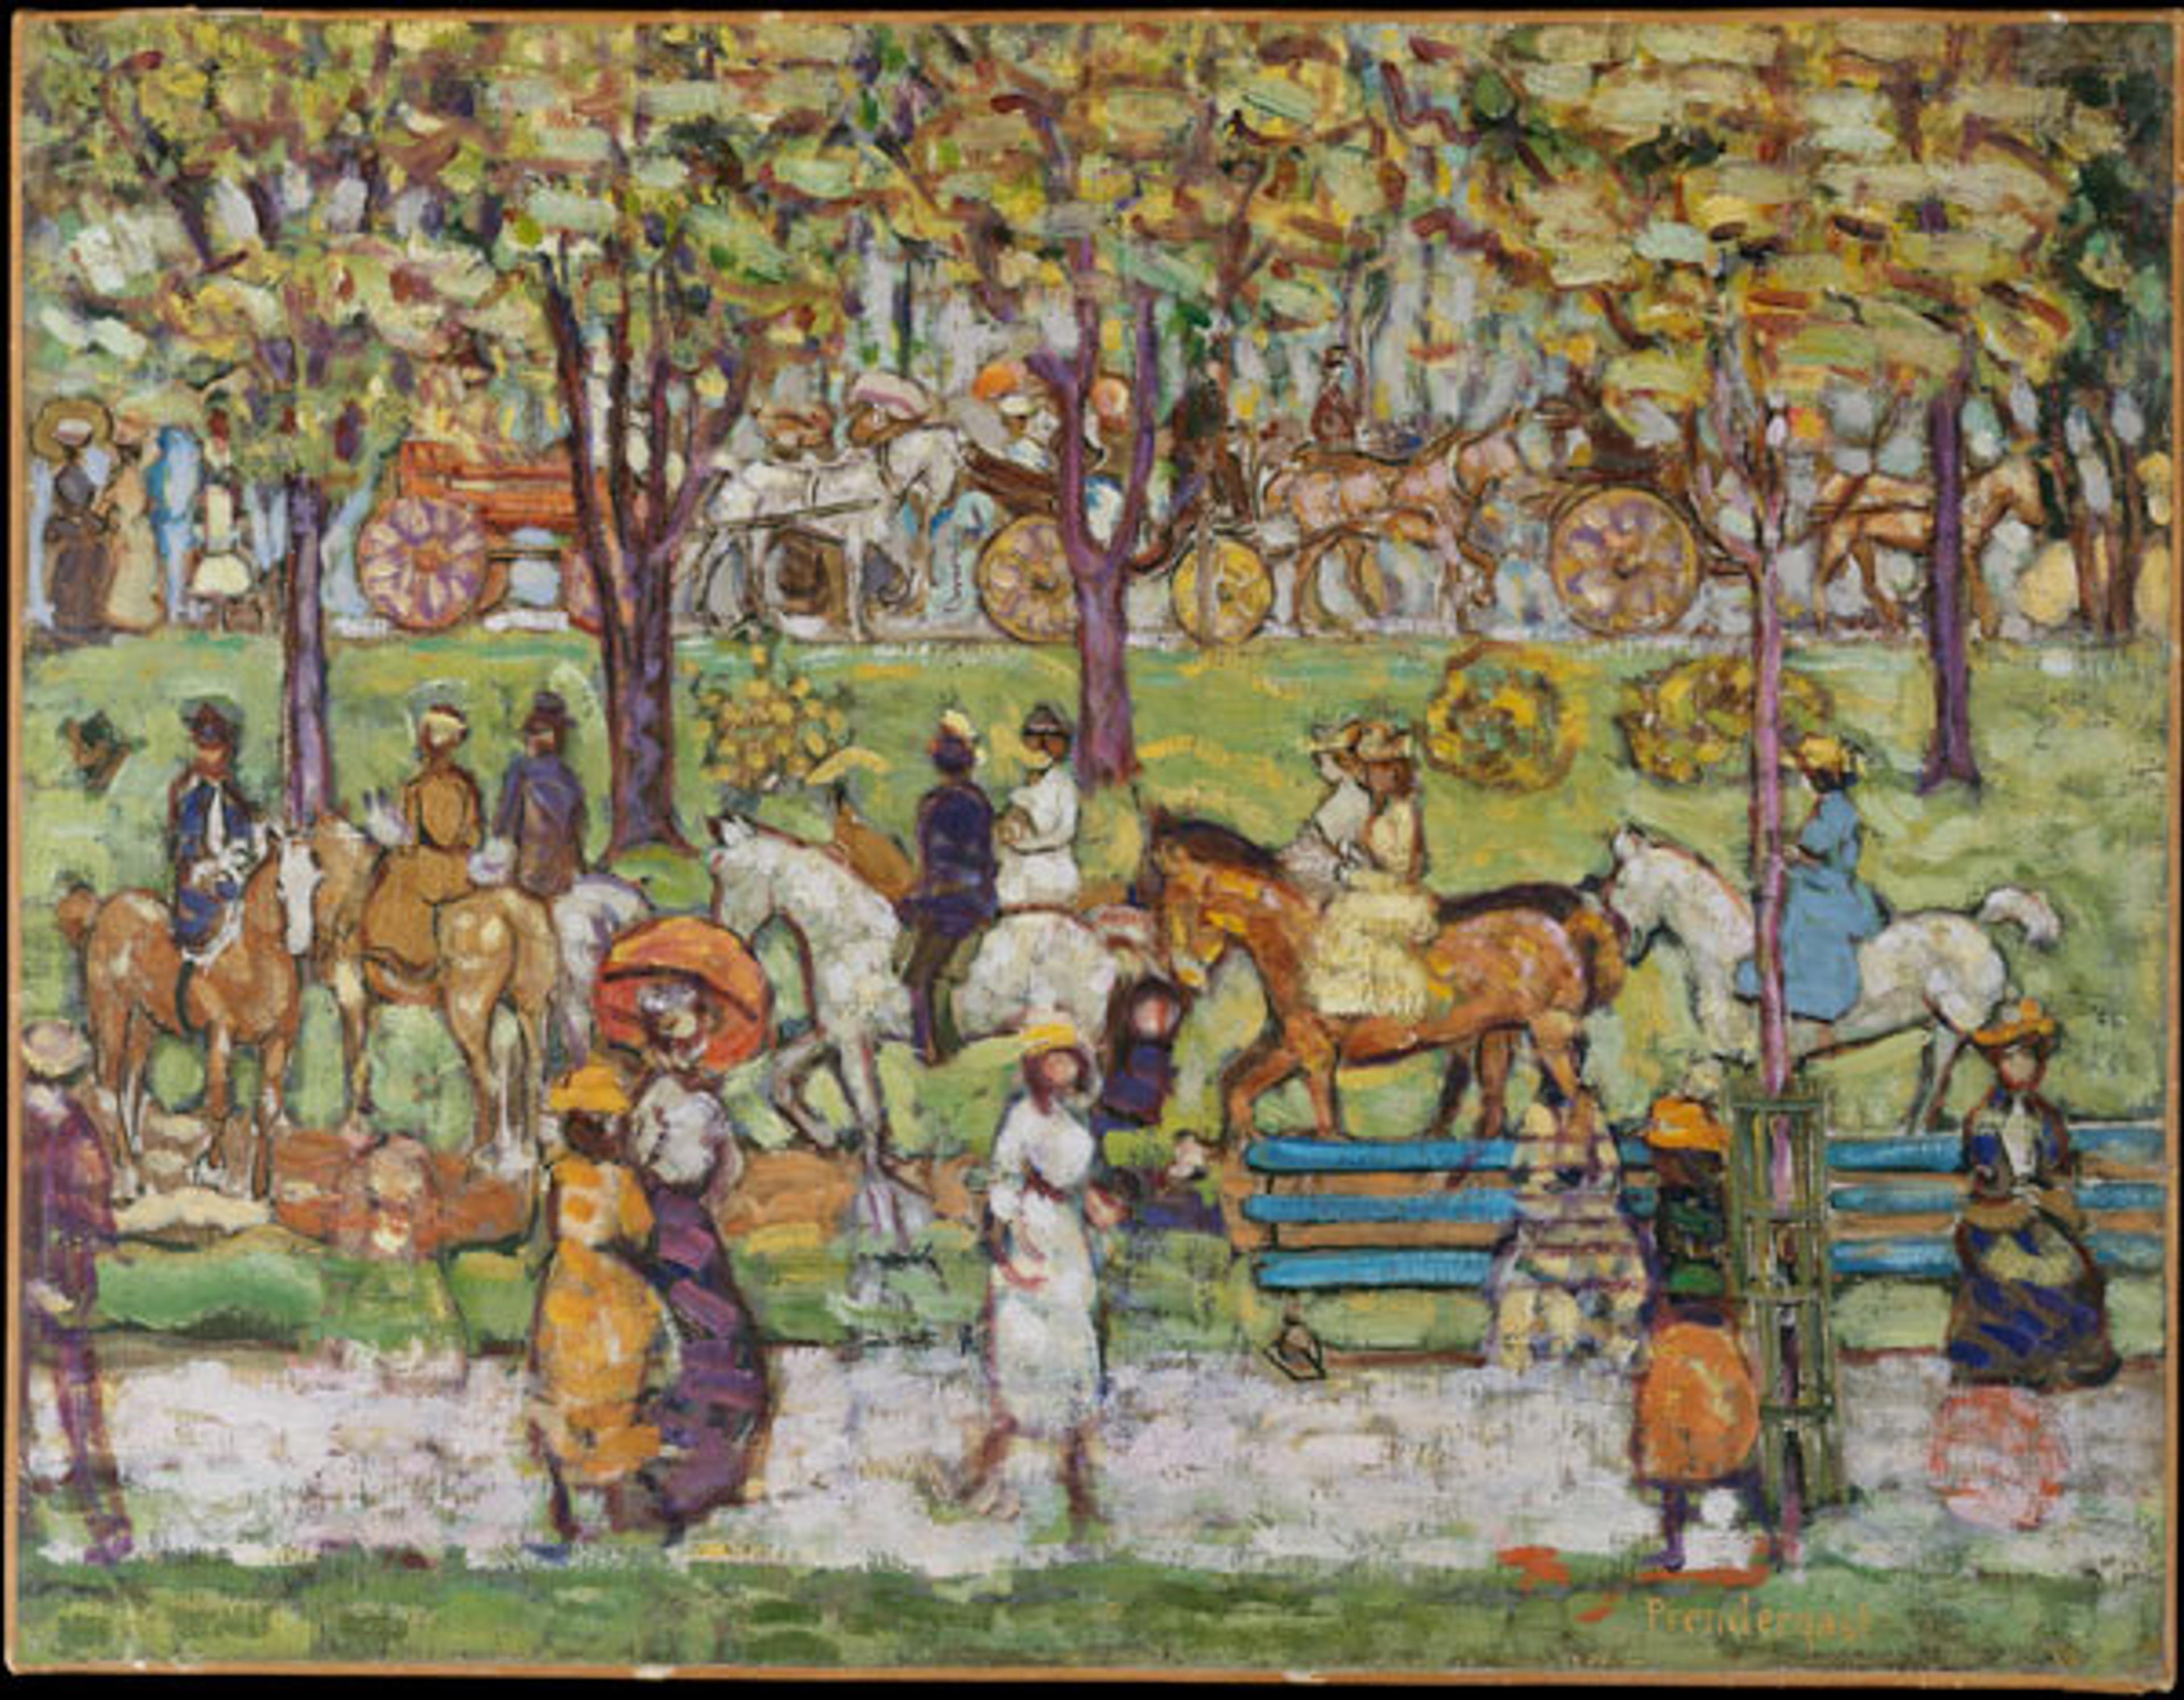 Maurice Brazil Prendergast (American, 1858–1924). Central Park, ca. 1914–15. Oil on canvas; 20 3/4 x 27 in. (52.7 x 68.6 cm). The Metropolitan Museum of Art, New York, George A. Hearn Fund, 1950 (50.25)